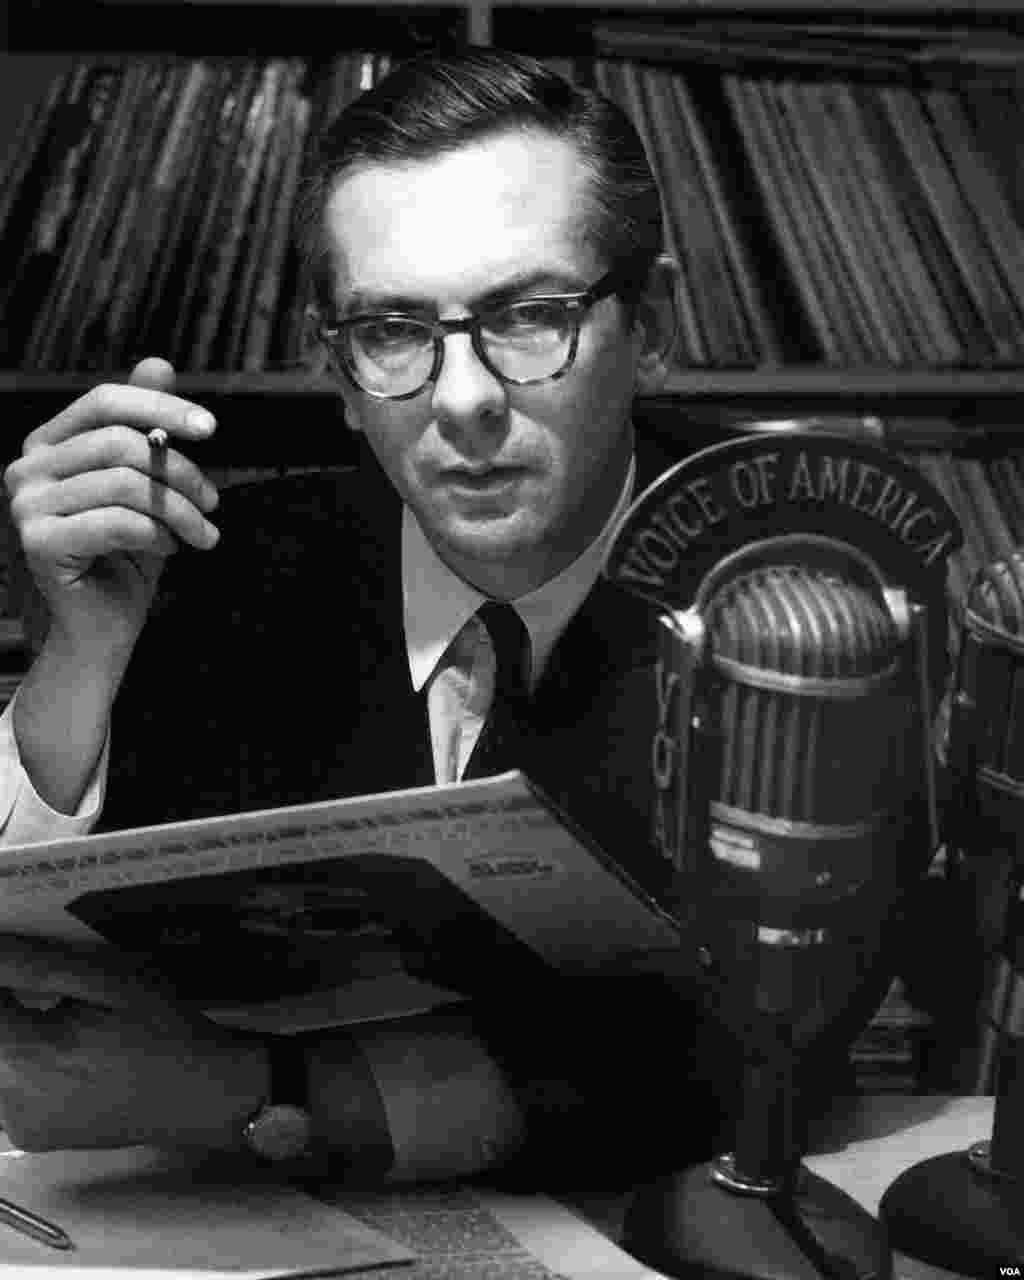 Publicity shot of Willis Conover at the microphone